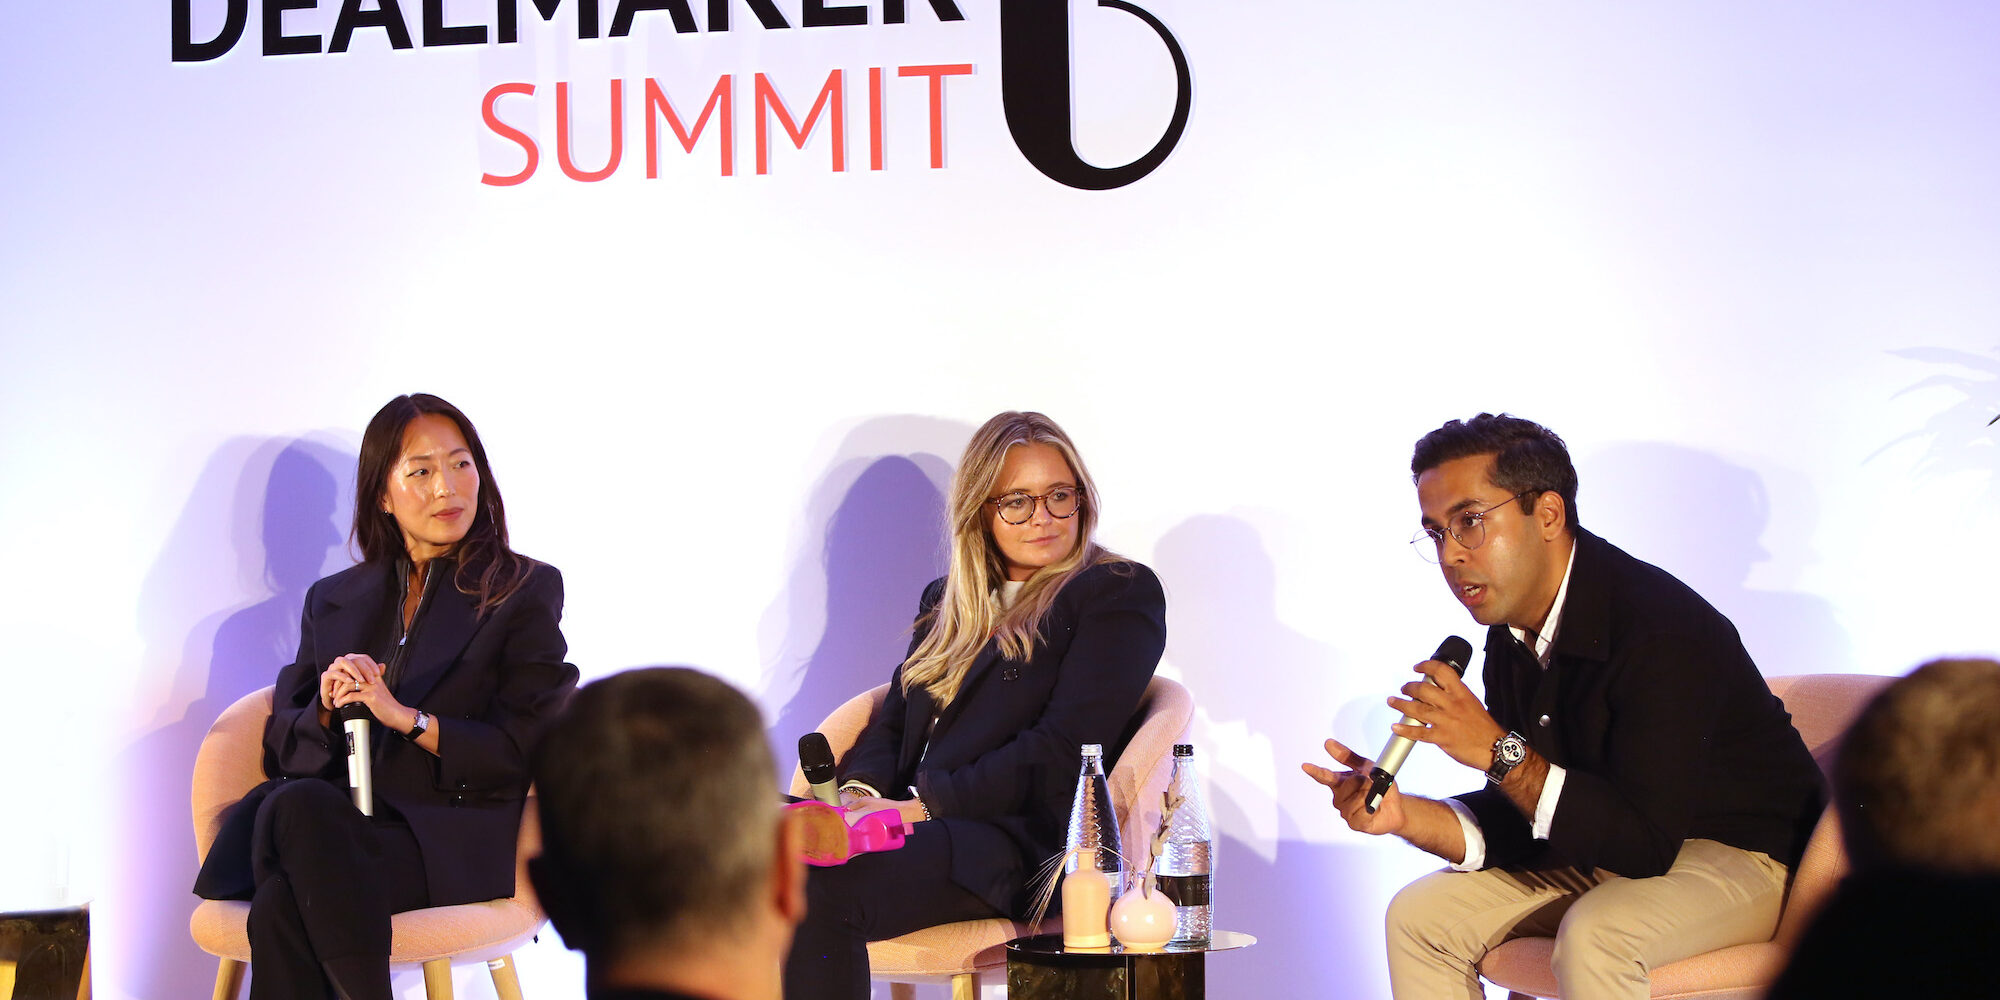 From Fragrance Category Bullishness To An Emphasis On Omnichannel, 10 Top Takeaways From Dealmaker Summit EU/UK